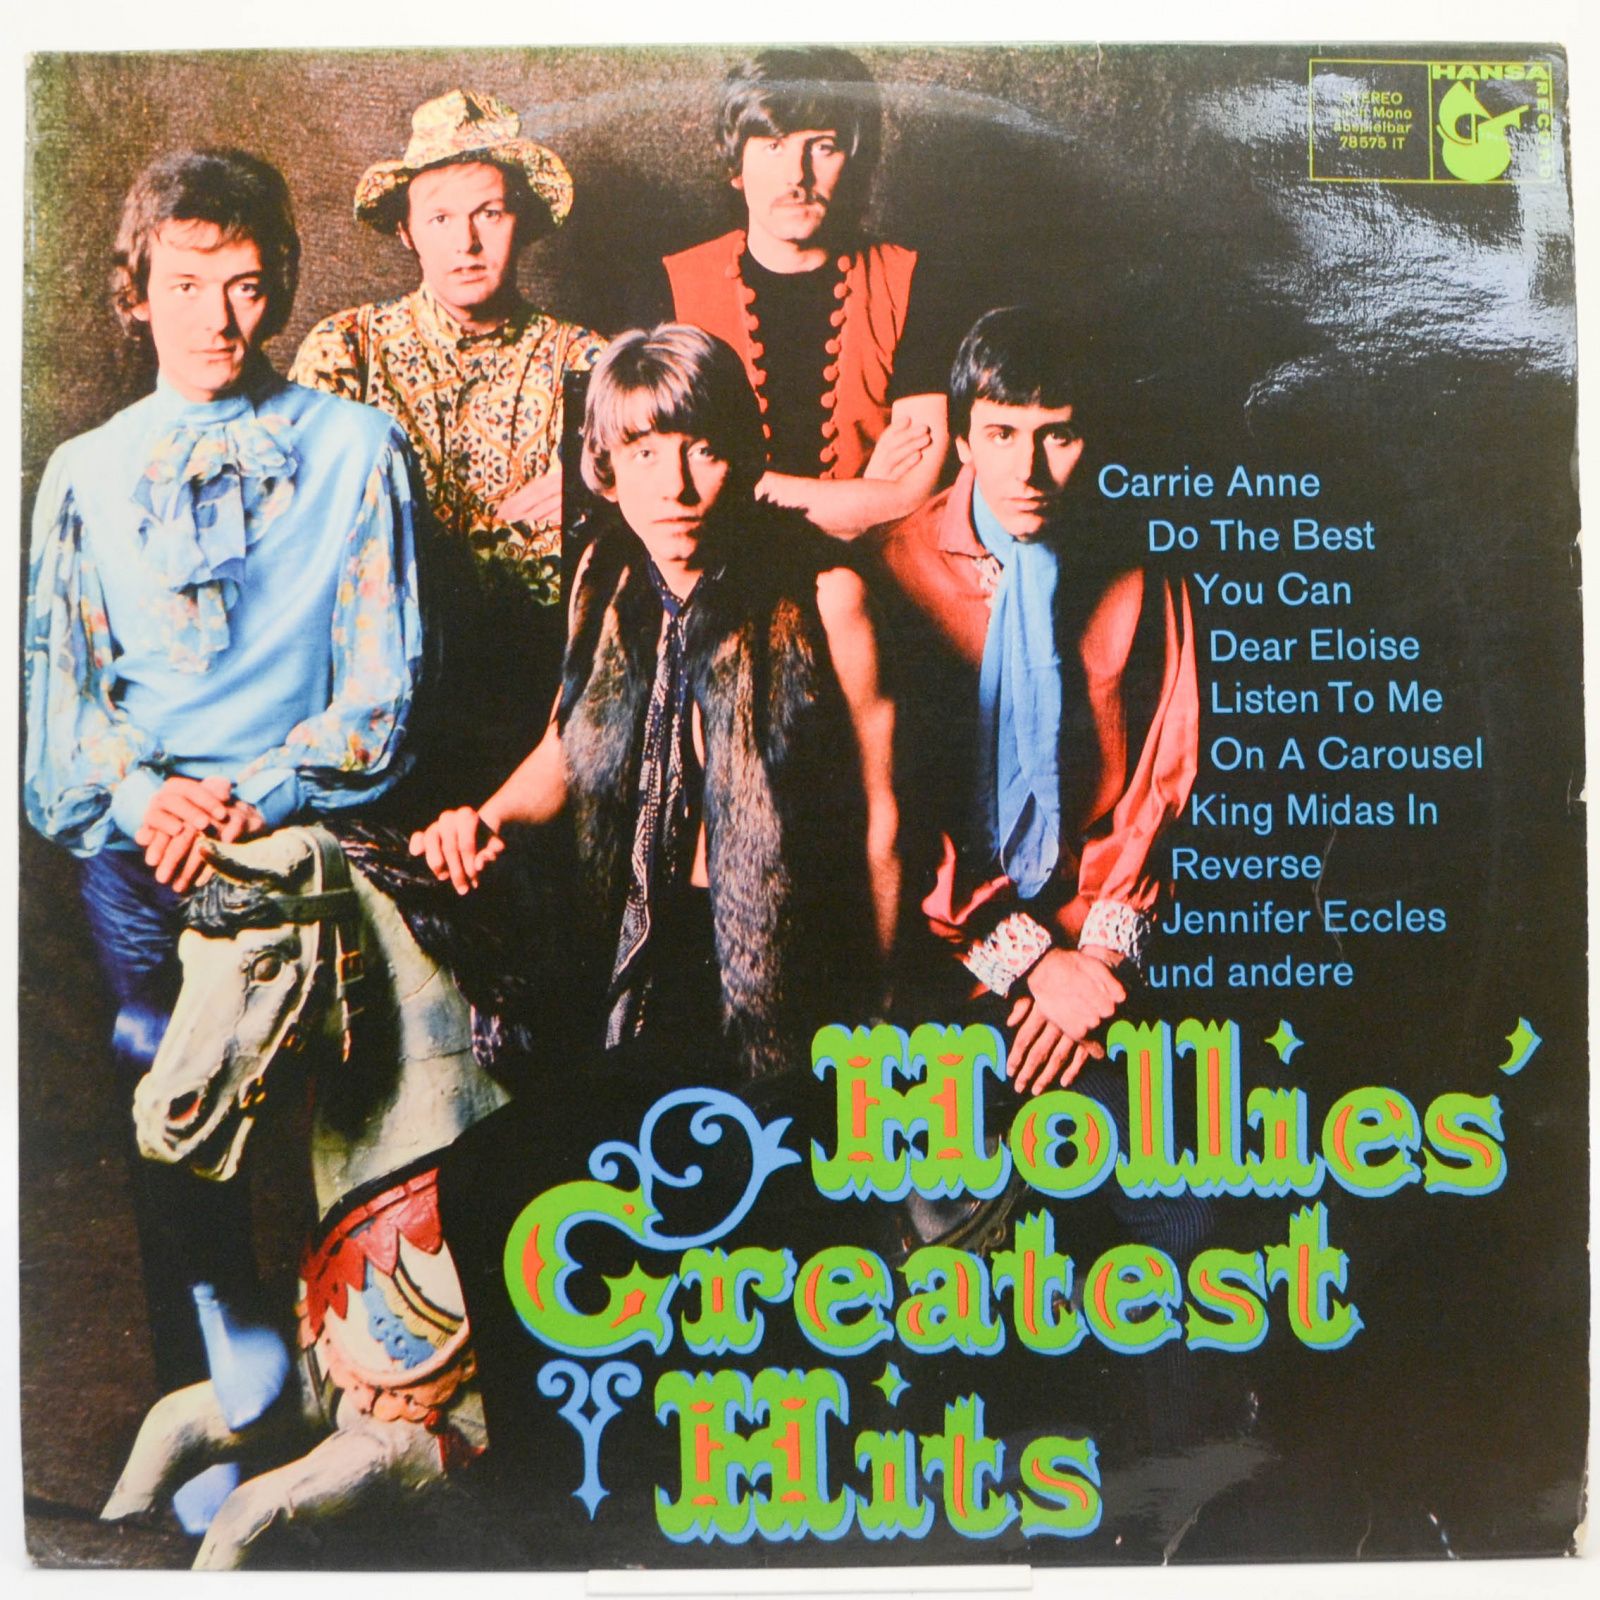 Hollies' Greatest Hits, 1968